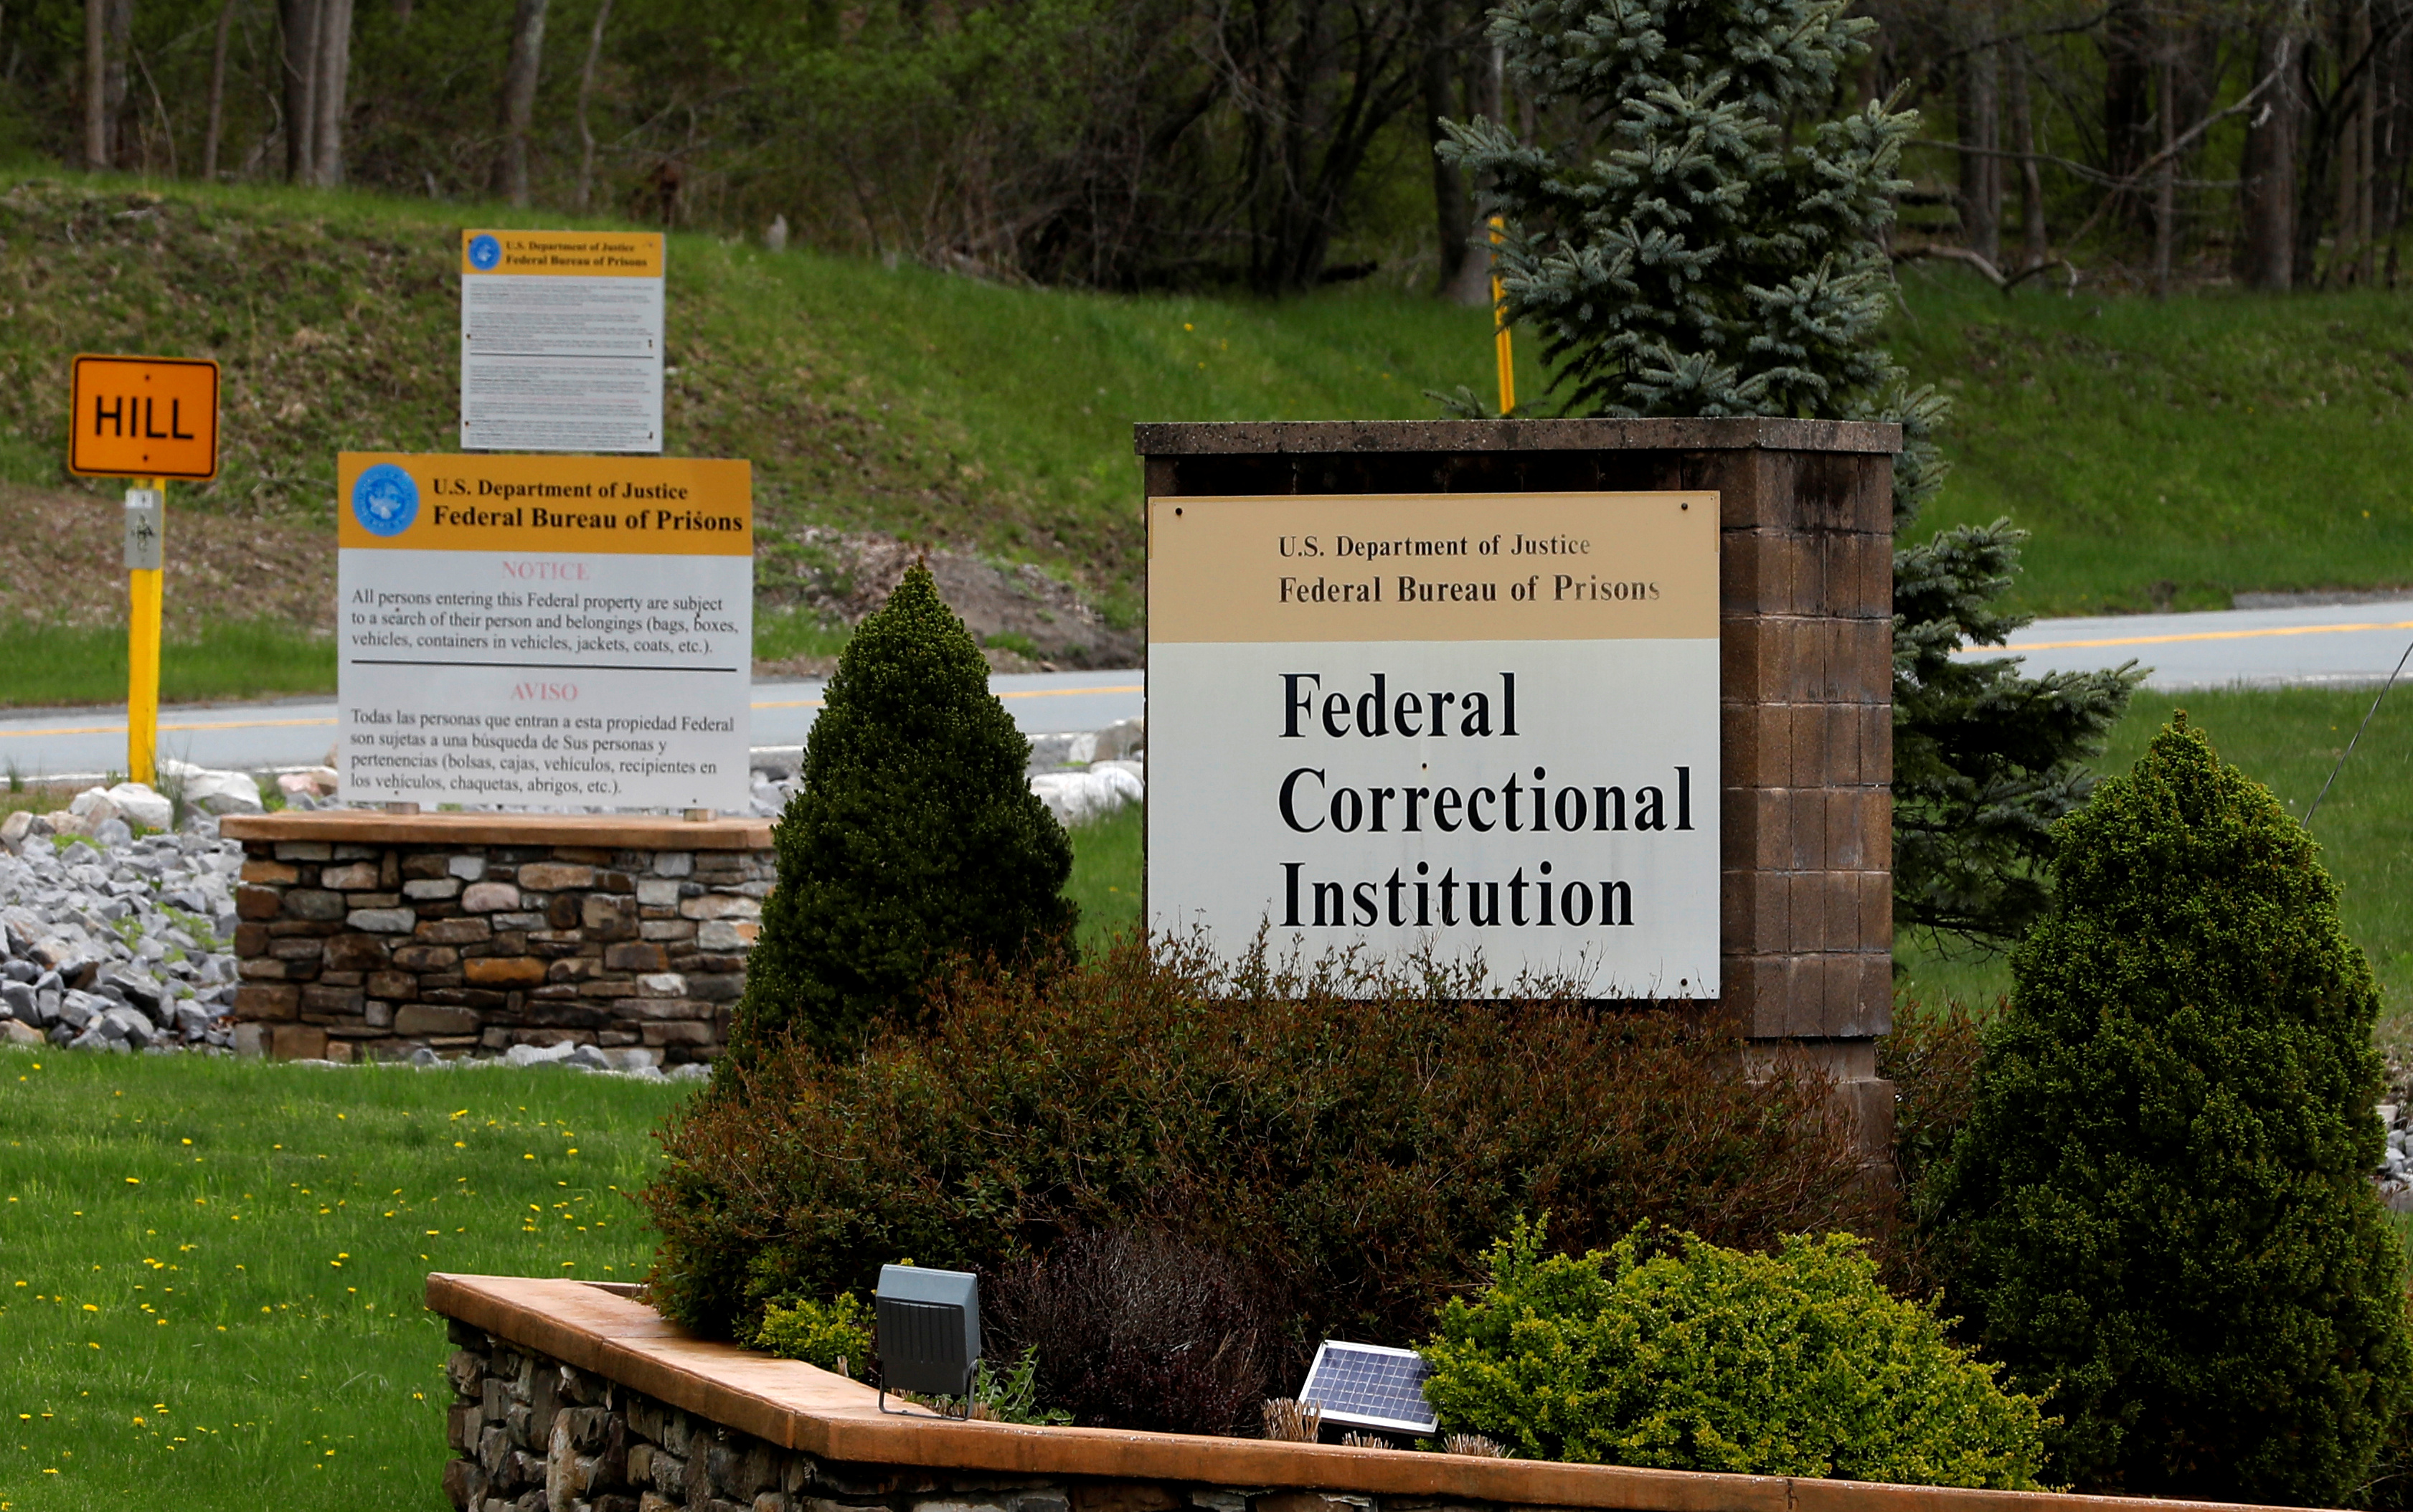 The entrance to the Federal Correctional Institution, Otisville, New York